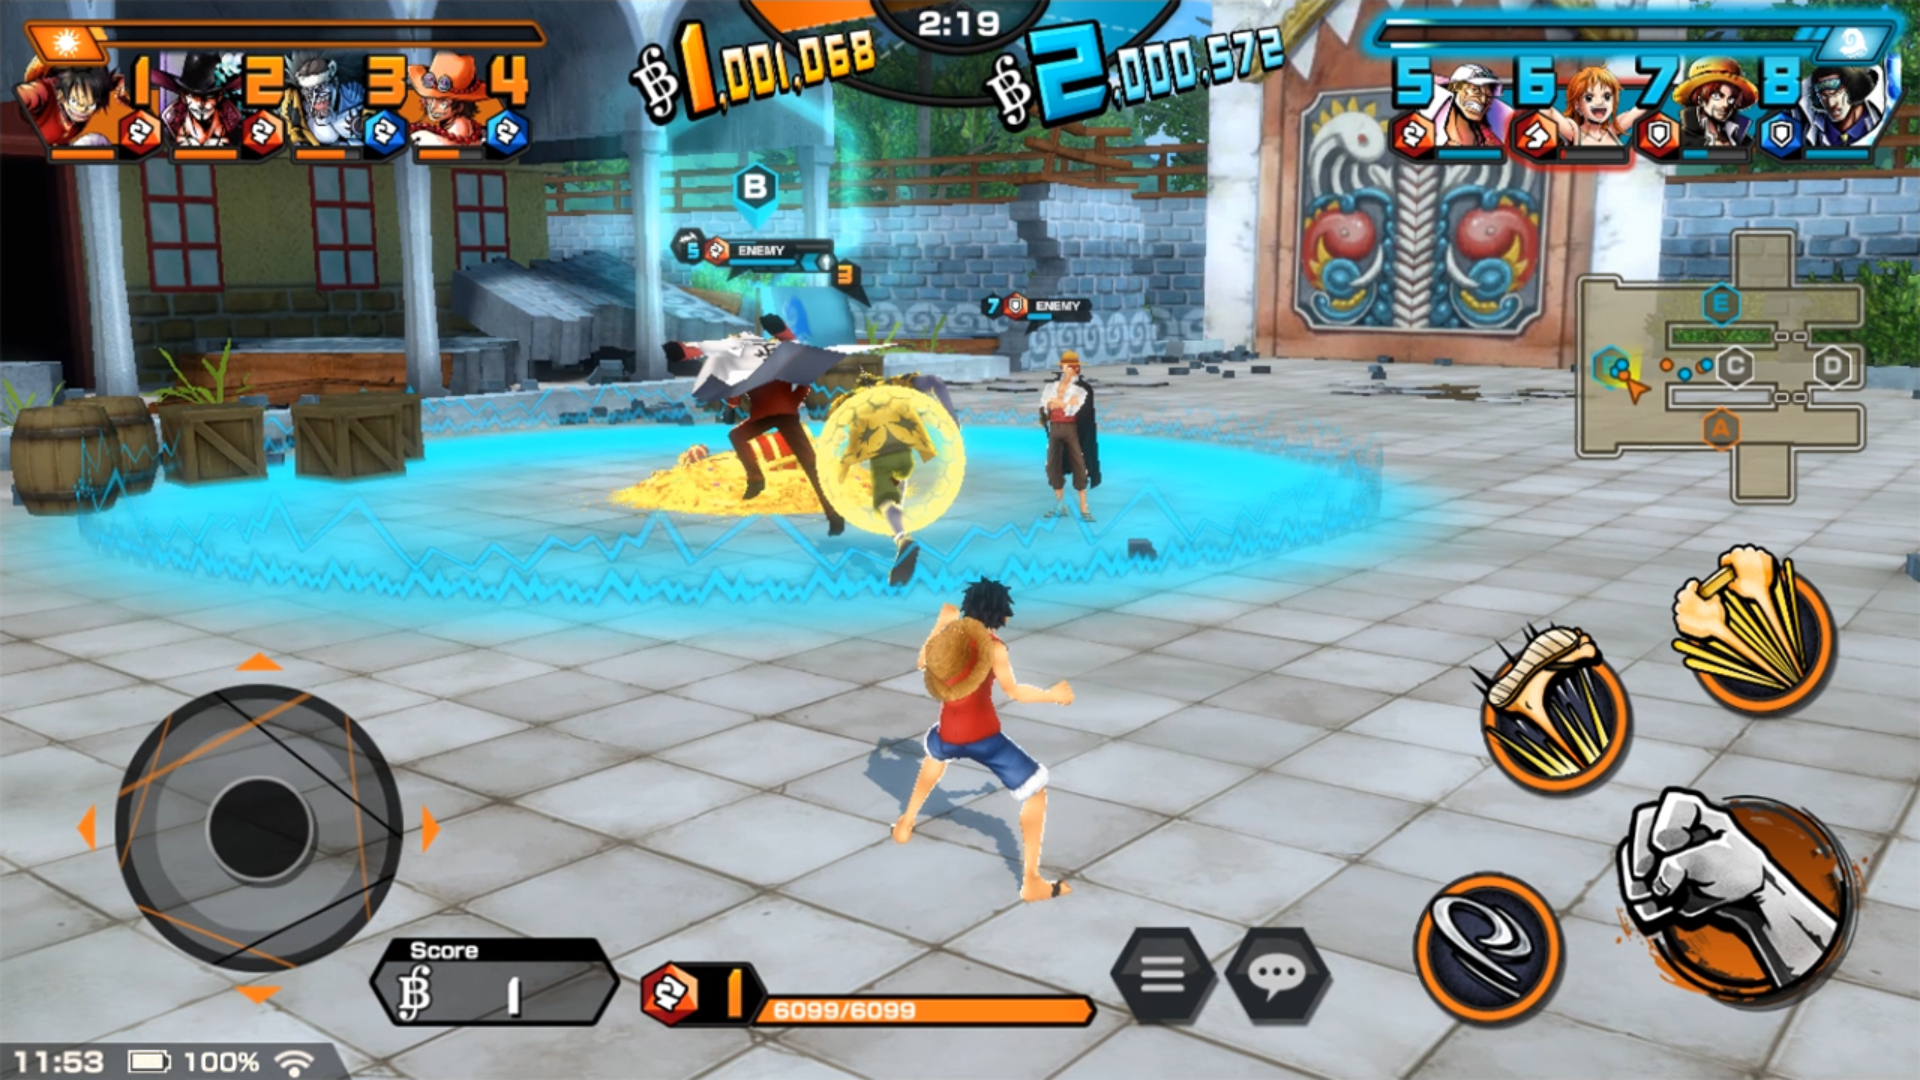 15 Best One Piece Video Games Worth Playing (Ranked) – FandomSpot